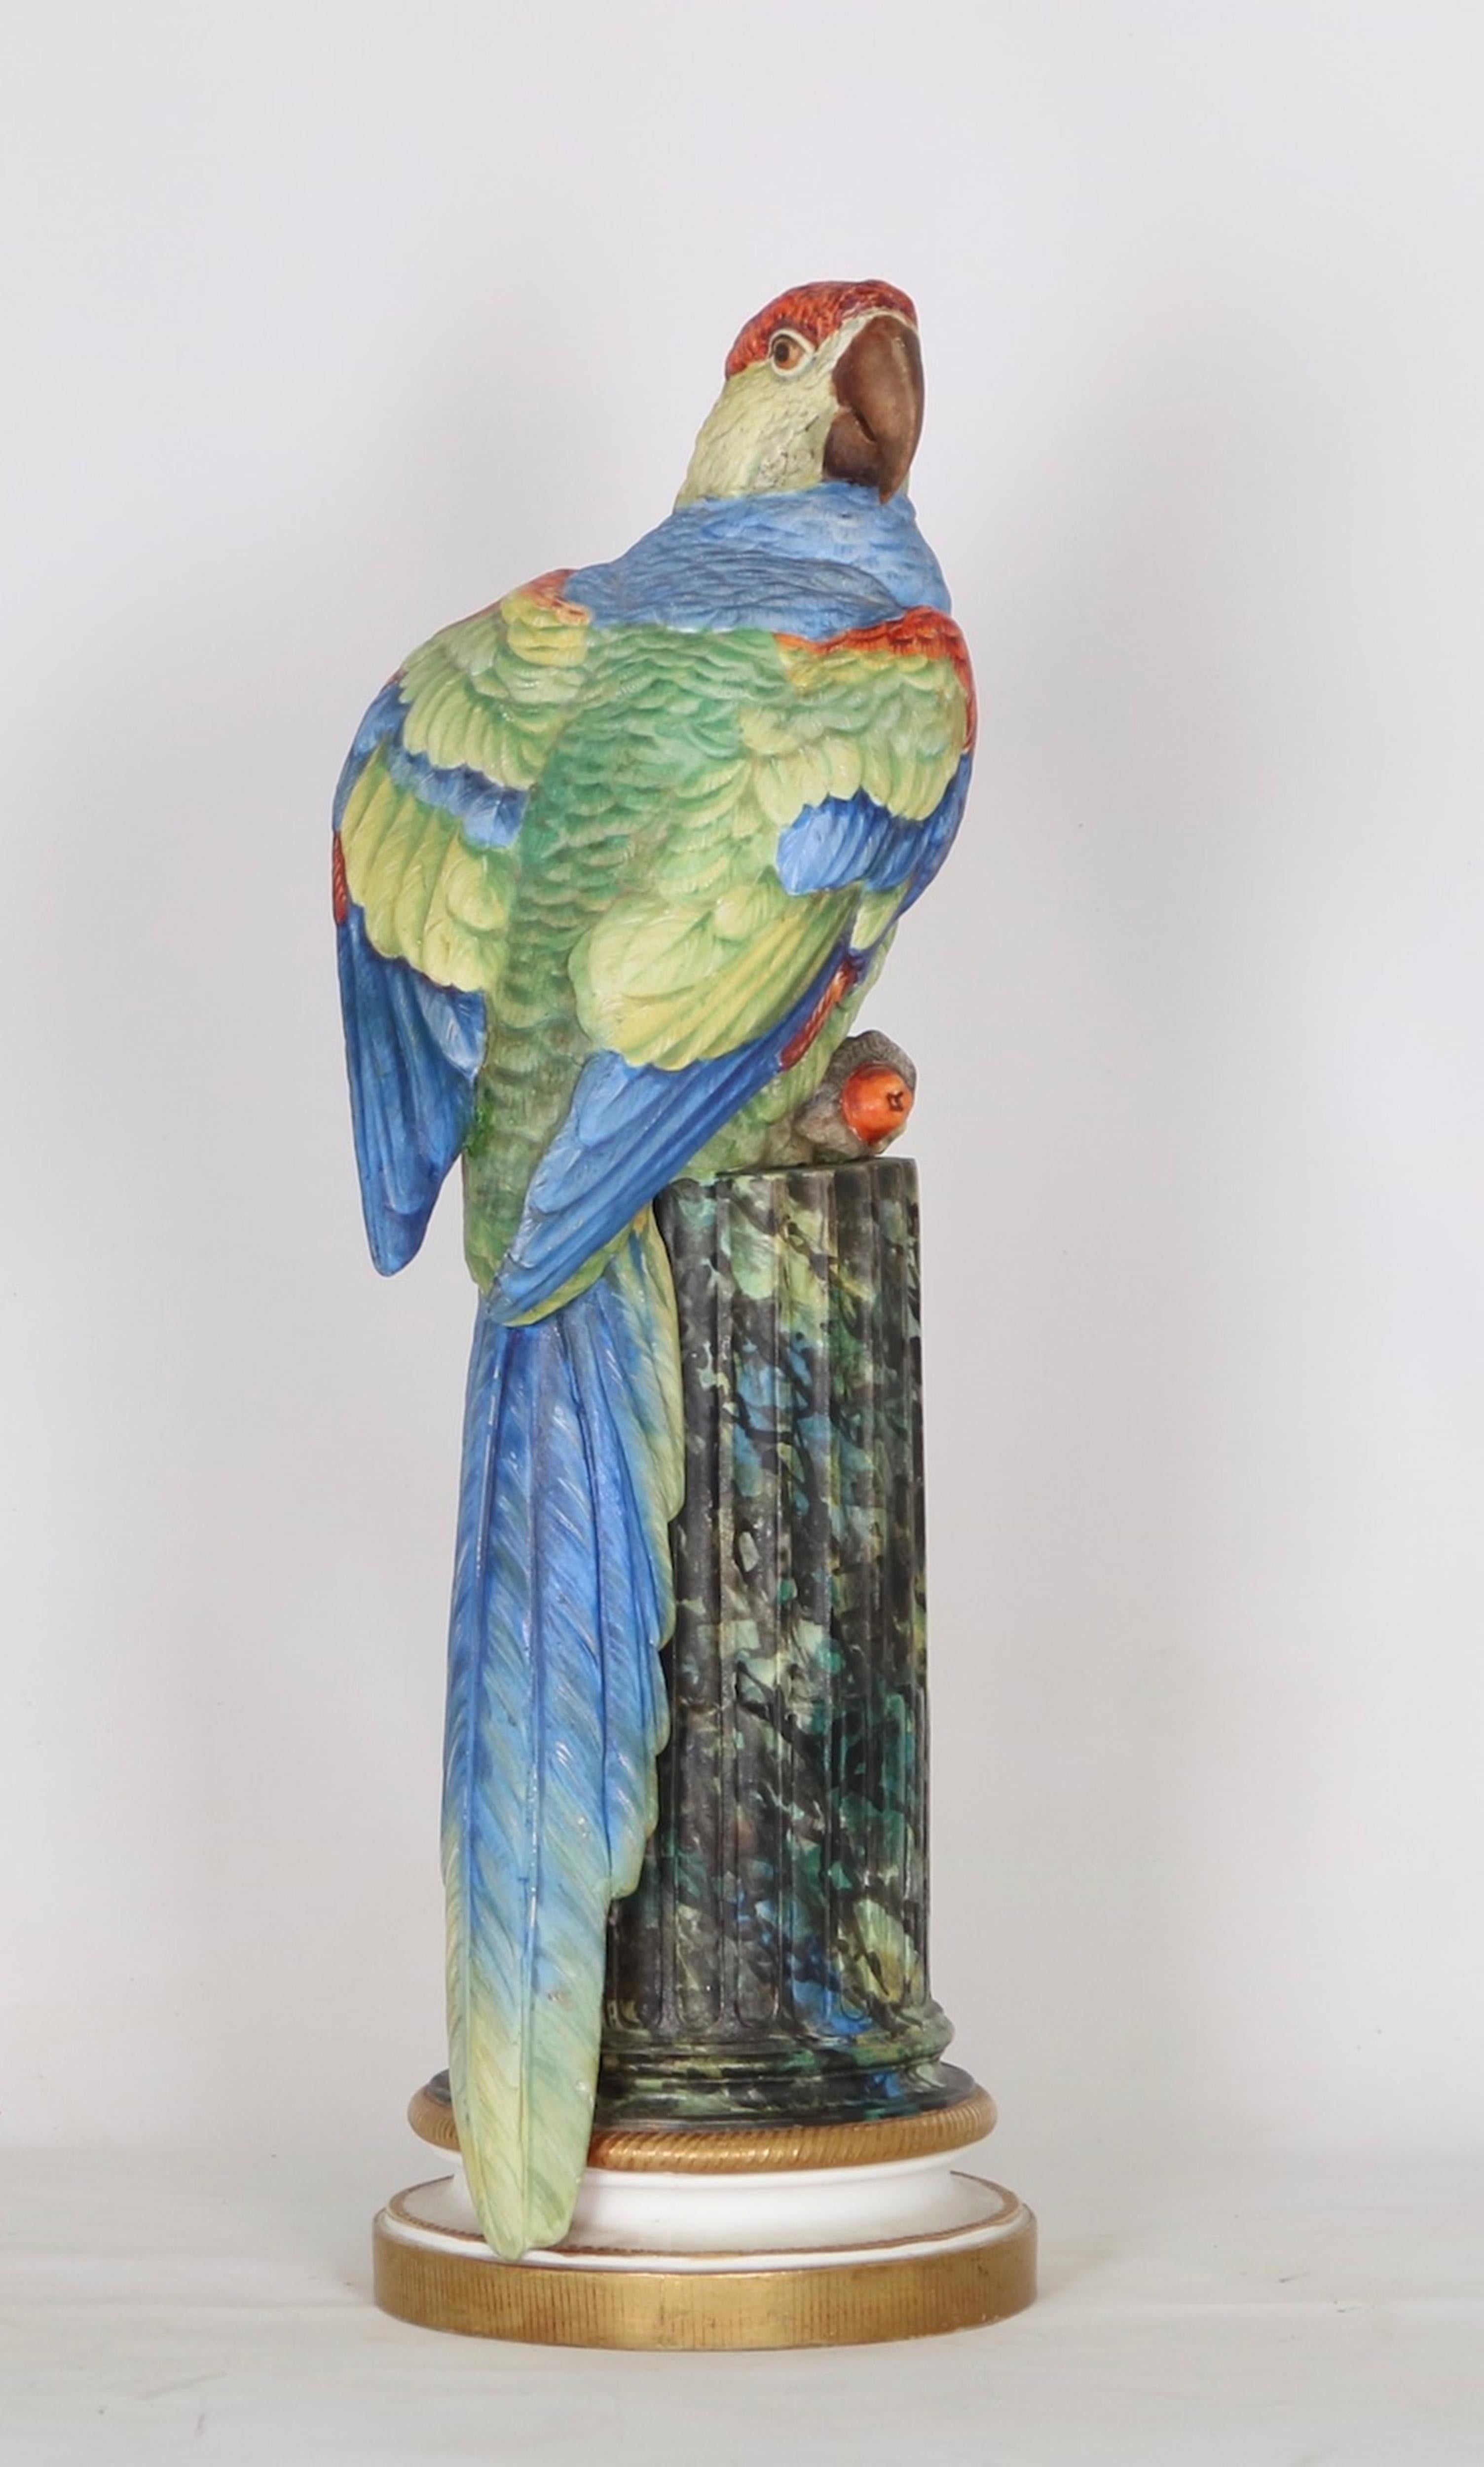 French Bisque sculpture of a parrot from the late 19th century. Features include a brightly painted parrot on a ribbed column base with gold-tone accents. The piece includes a blue seal on the interior. Wear appropriate to age and use. The sculpture